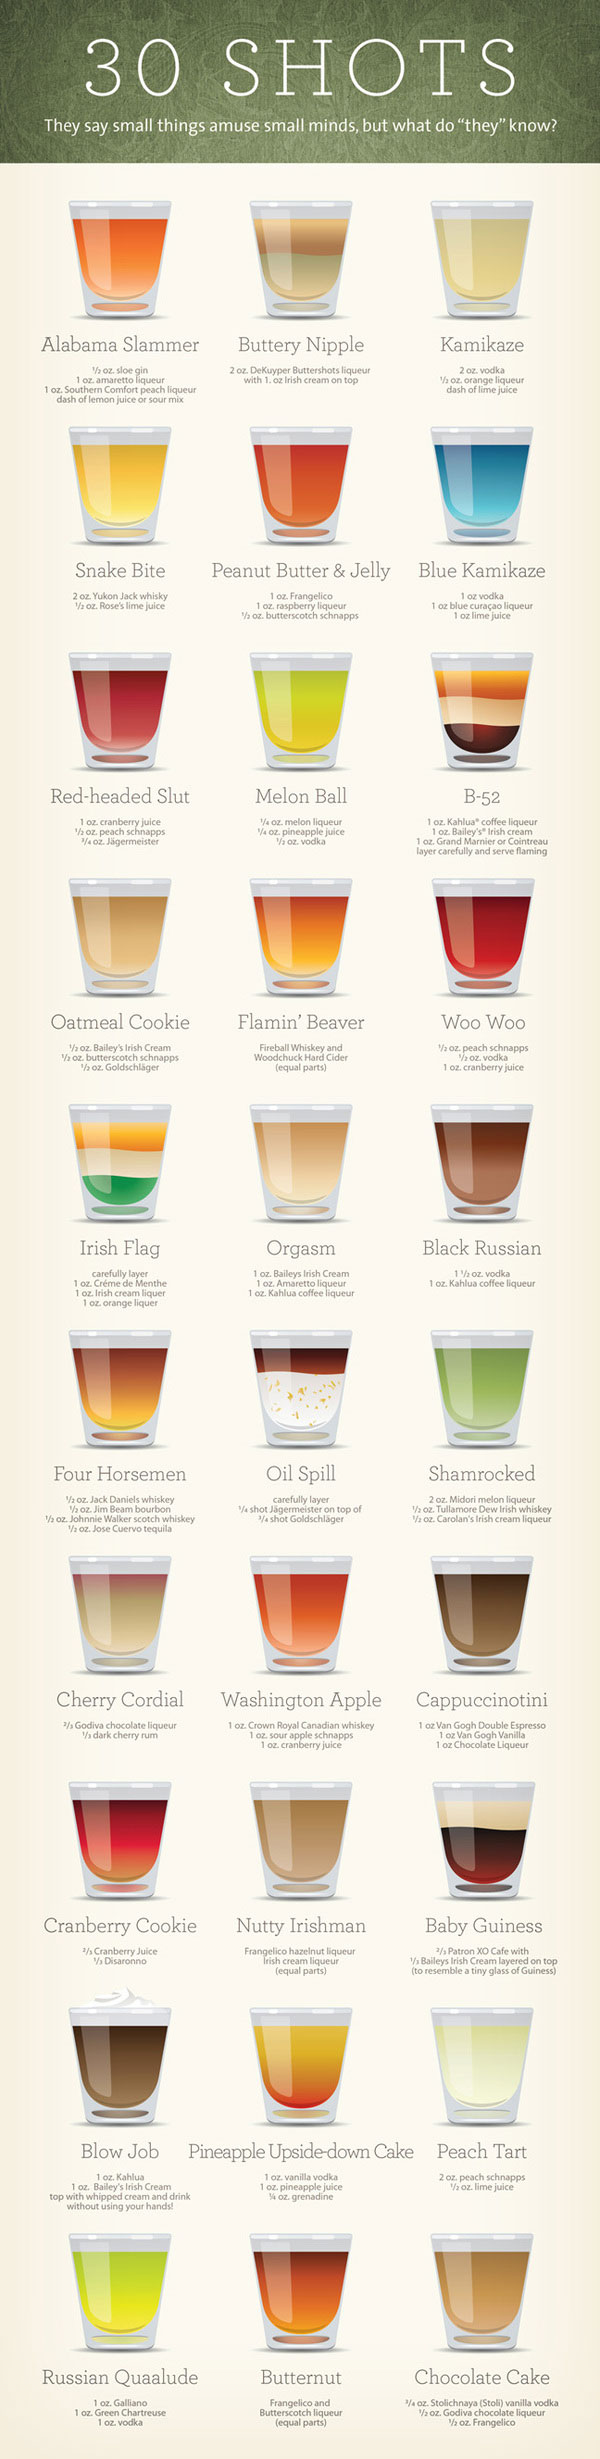 30 Different Cocktail Shot Recipes Infographic